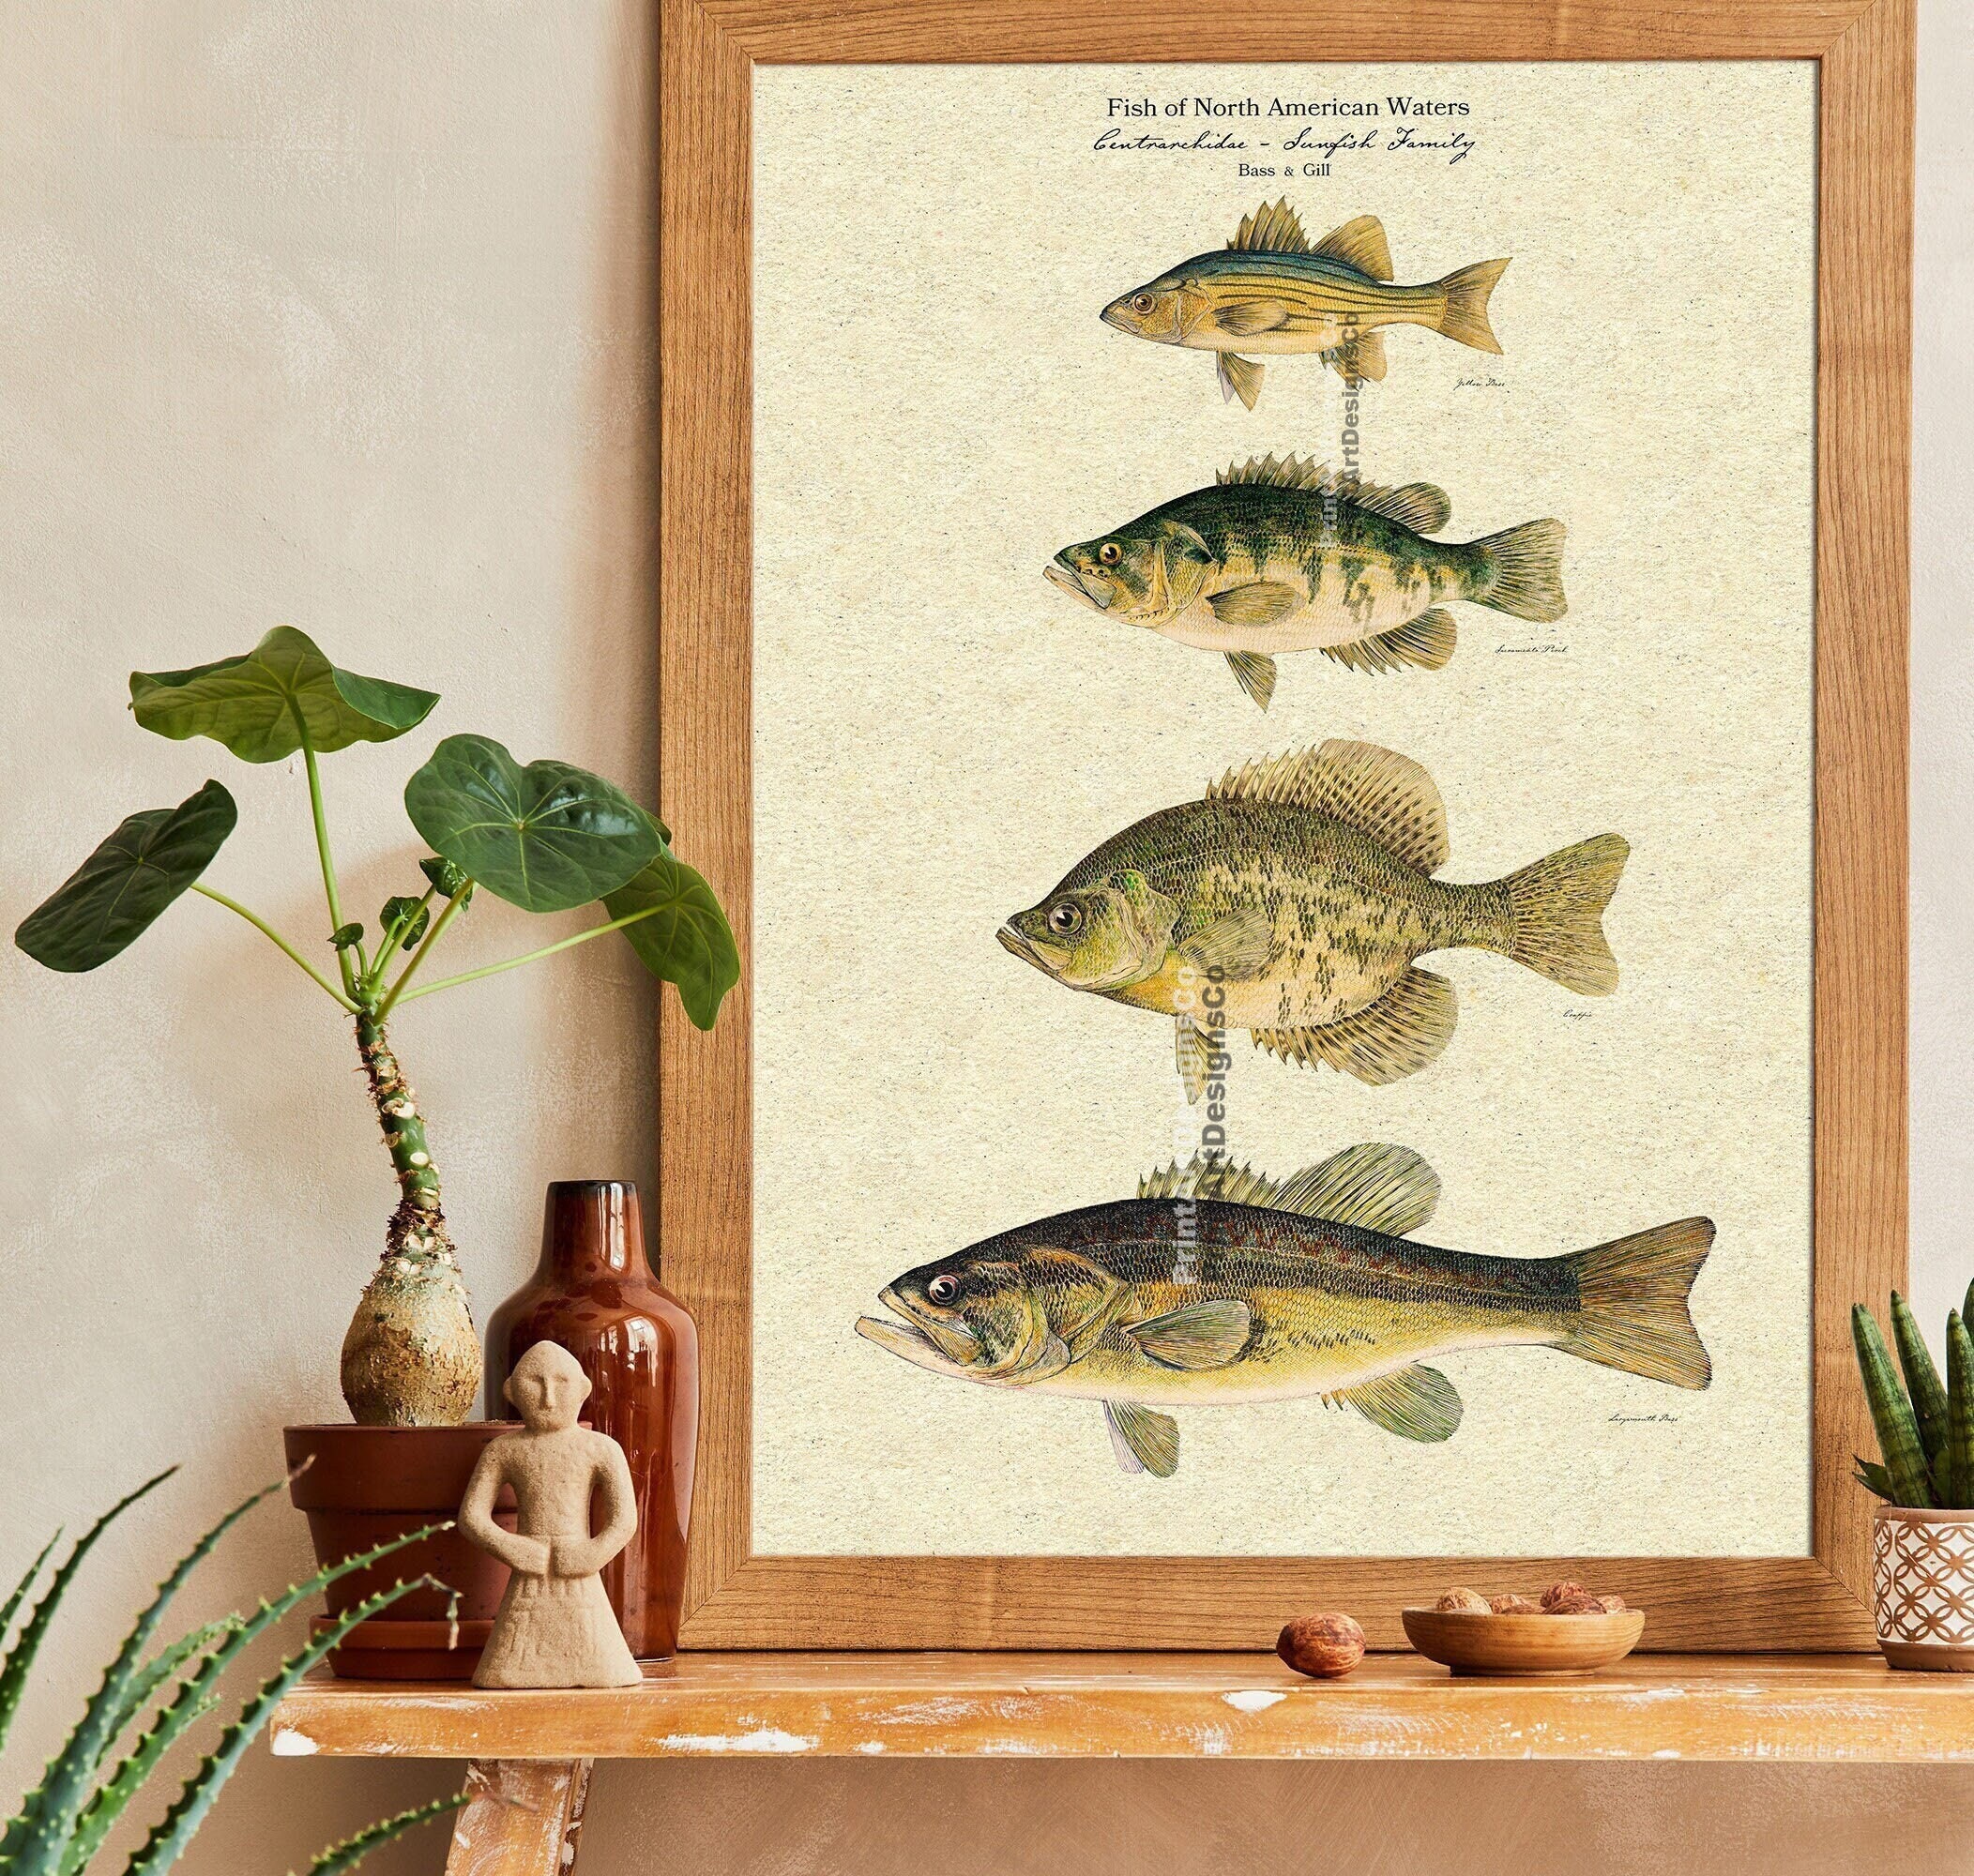  Fly Fishing Lures - Vintage Rustic Fishing Wall Decor 8x10  Unframed Art Poster Print - Lake House Fish Decorations for Bar, Man Cave,  Cabin, Lodge - Fishing Gifts for Men, Boys